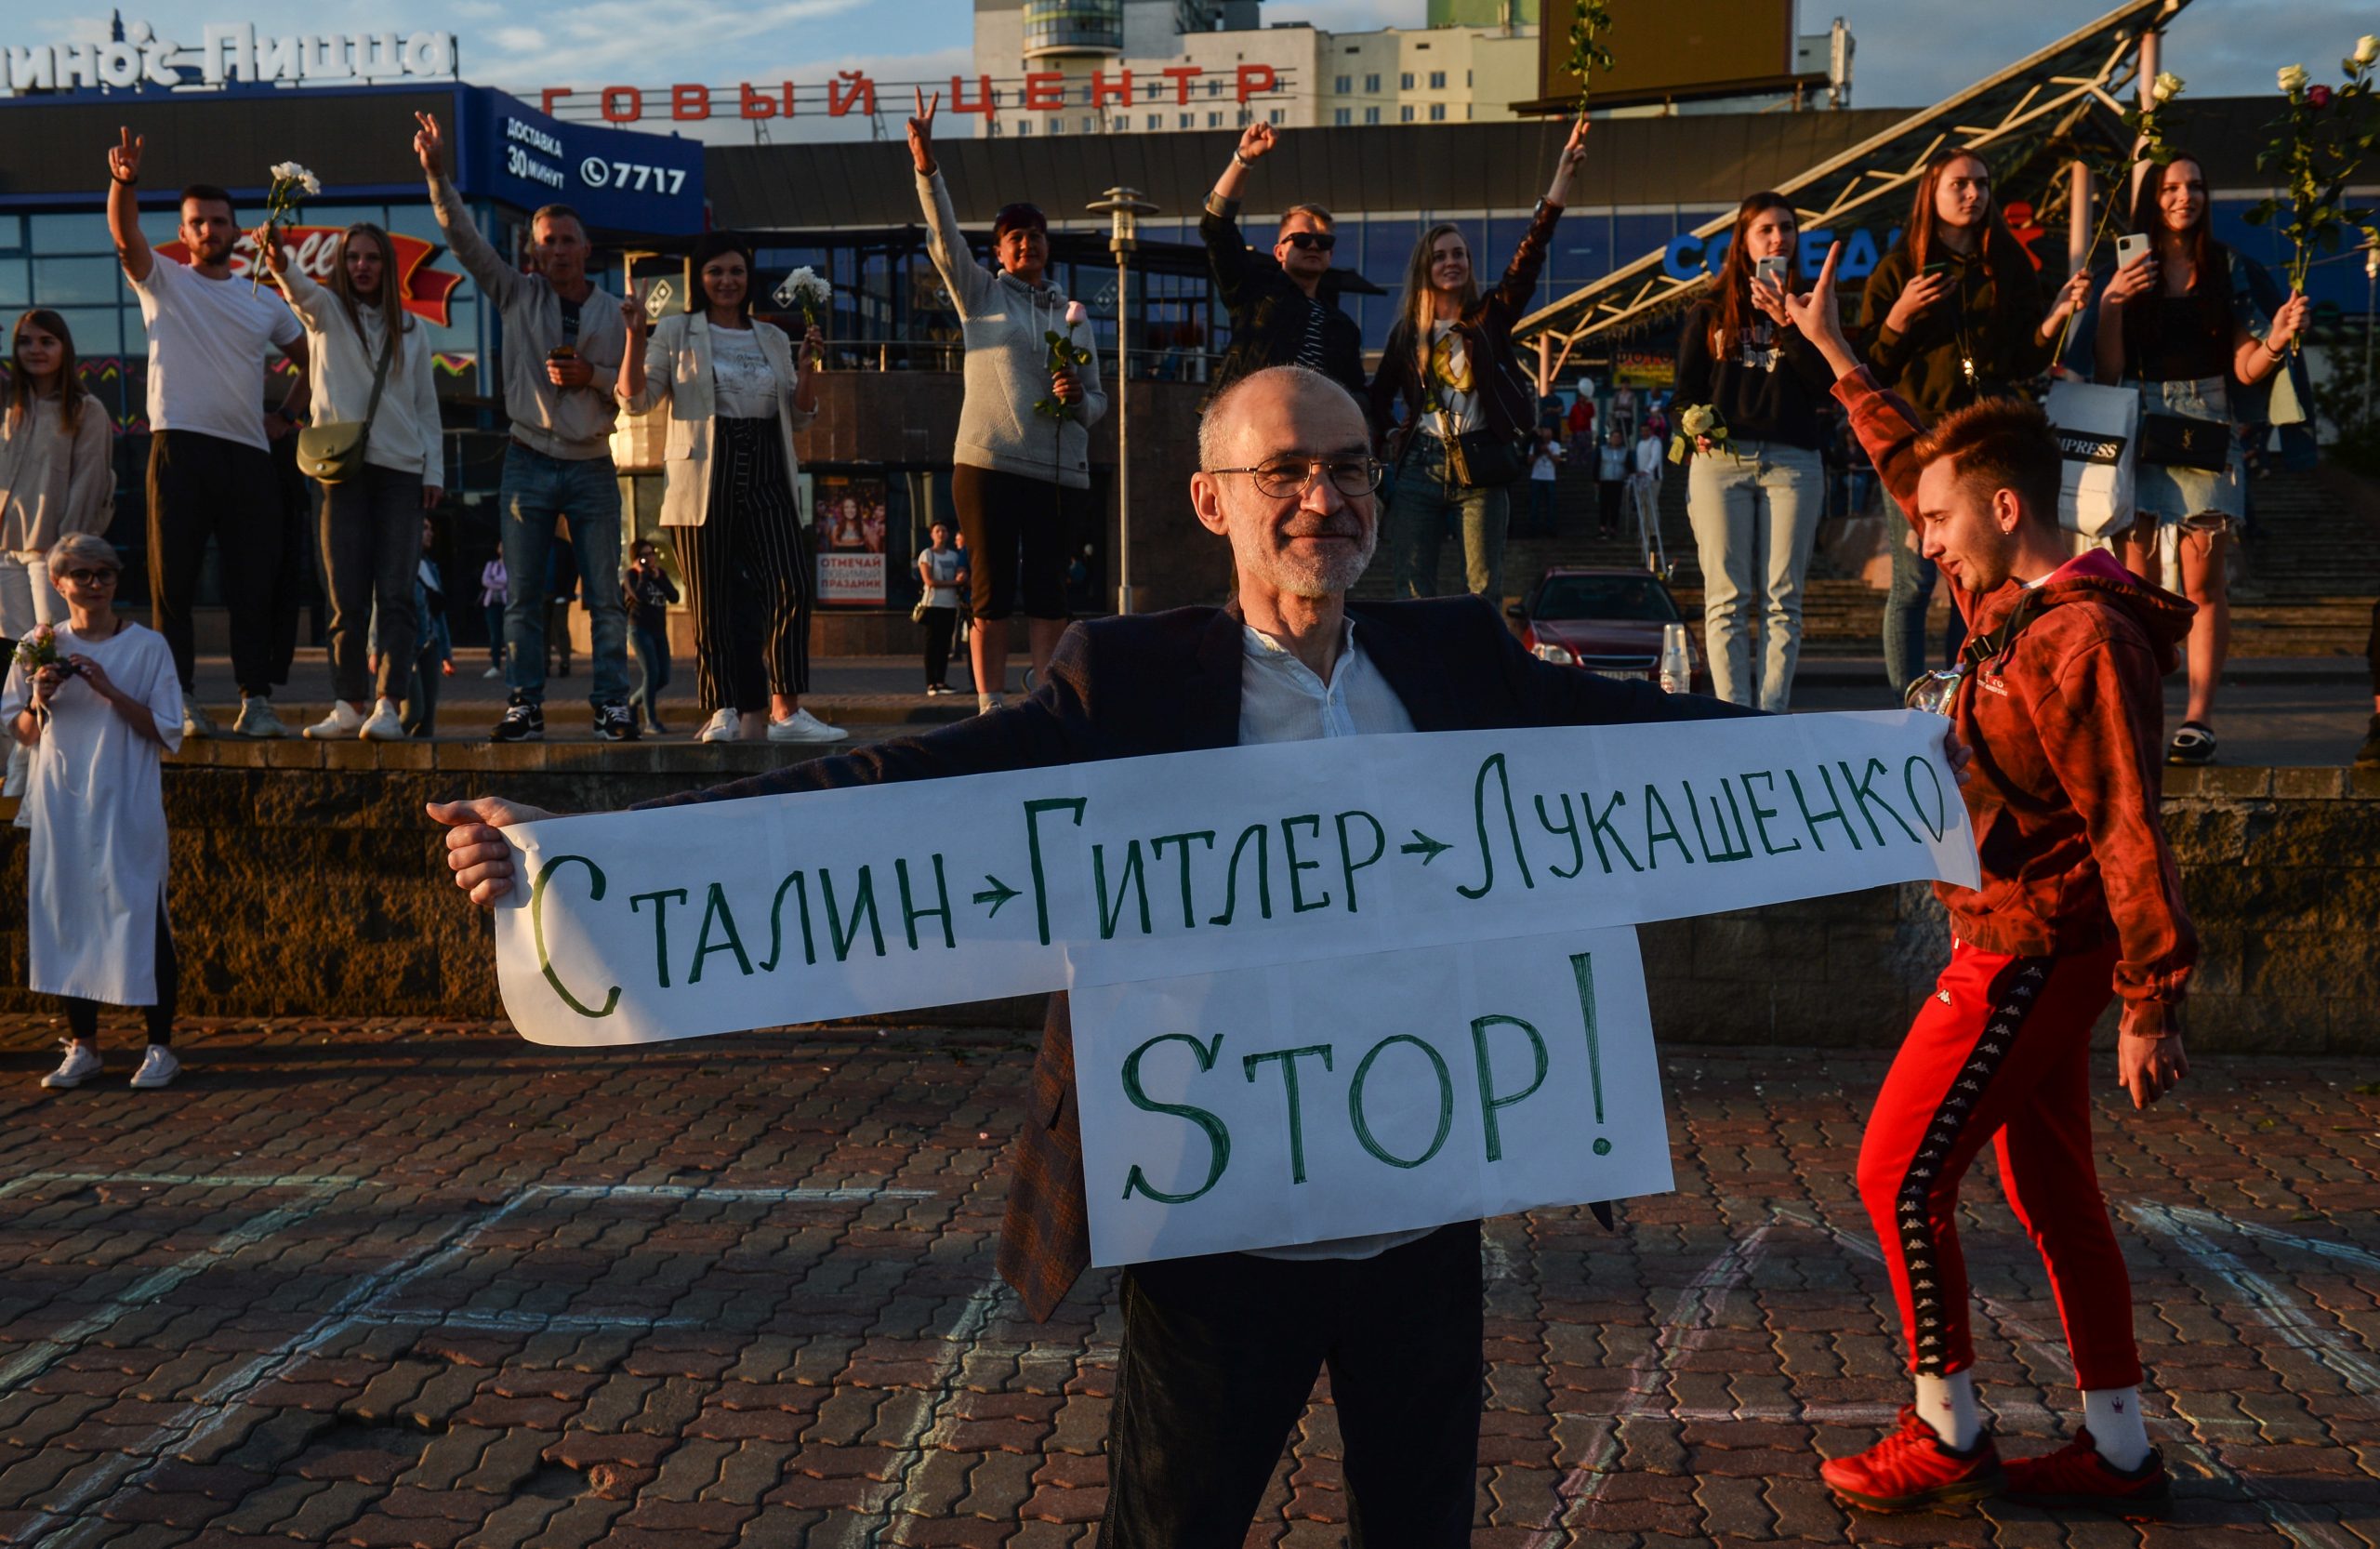 epa08601590 A man holds poster signed 'Stalin - Hitler - Lukashenko - STOP!' during a rally in support of detained and injured participants of the protests that erupted in the aftermath of the presidential election, in Minsk, Belarus, 13  August 2020. Long-time President of Belarus Alexander Lukashenko won the elections by a landslide with 80 percent of the votes, a result questioned and protested by the oppositions. Opposition leader Tikhanovskaya fled to Lithuania after rejecting the election results she claimed was rigged.  EPA/YAUHEN YERCHAK